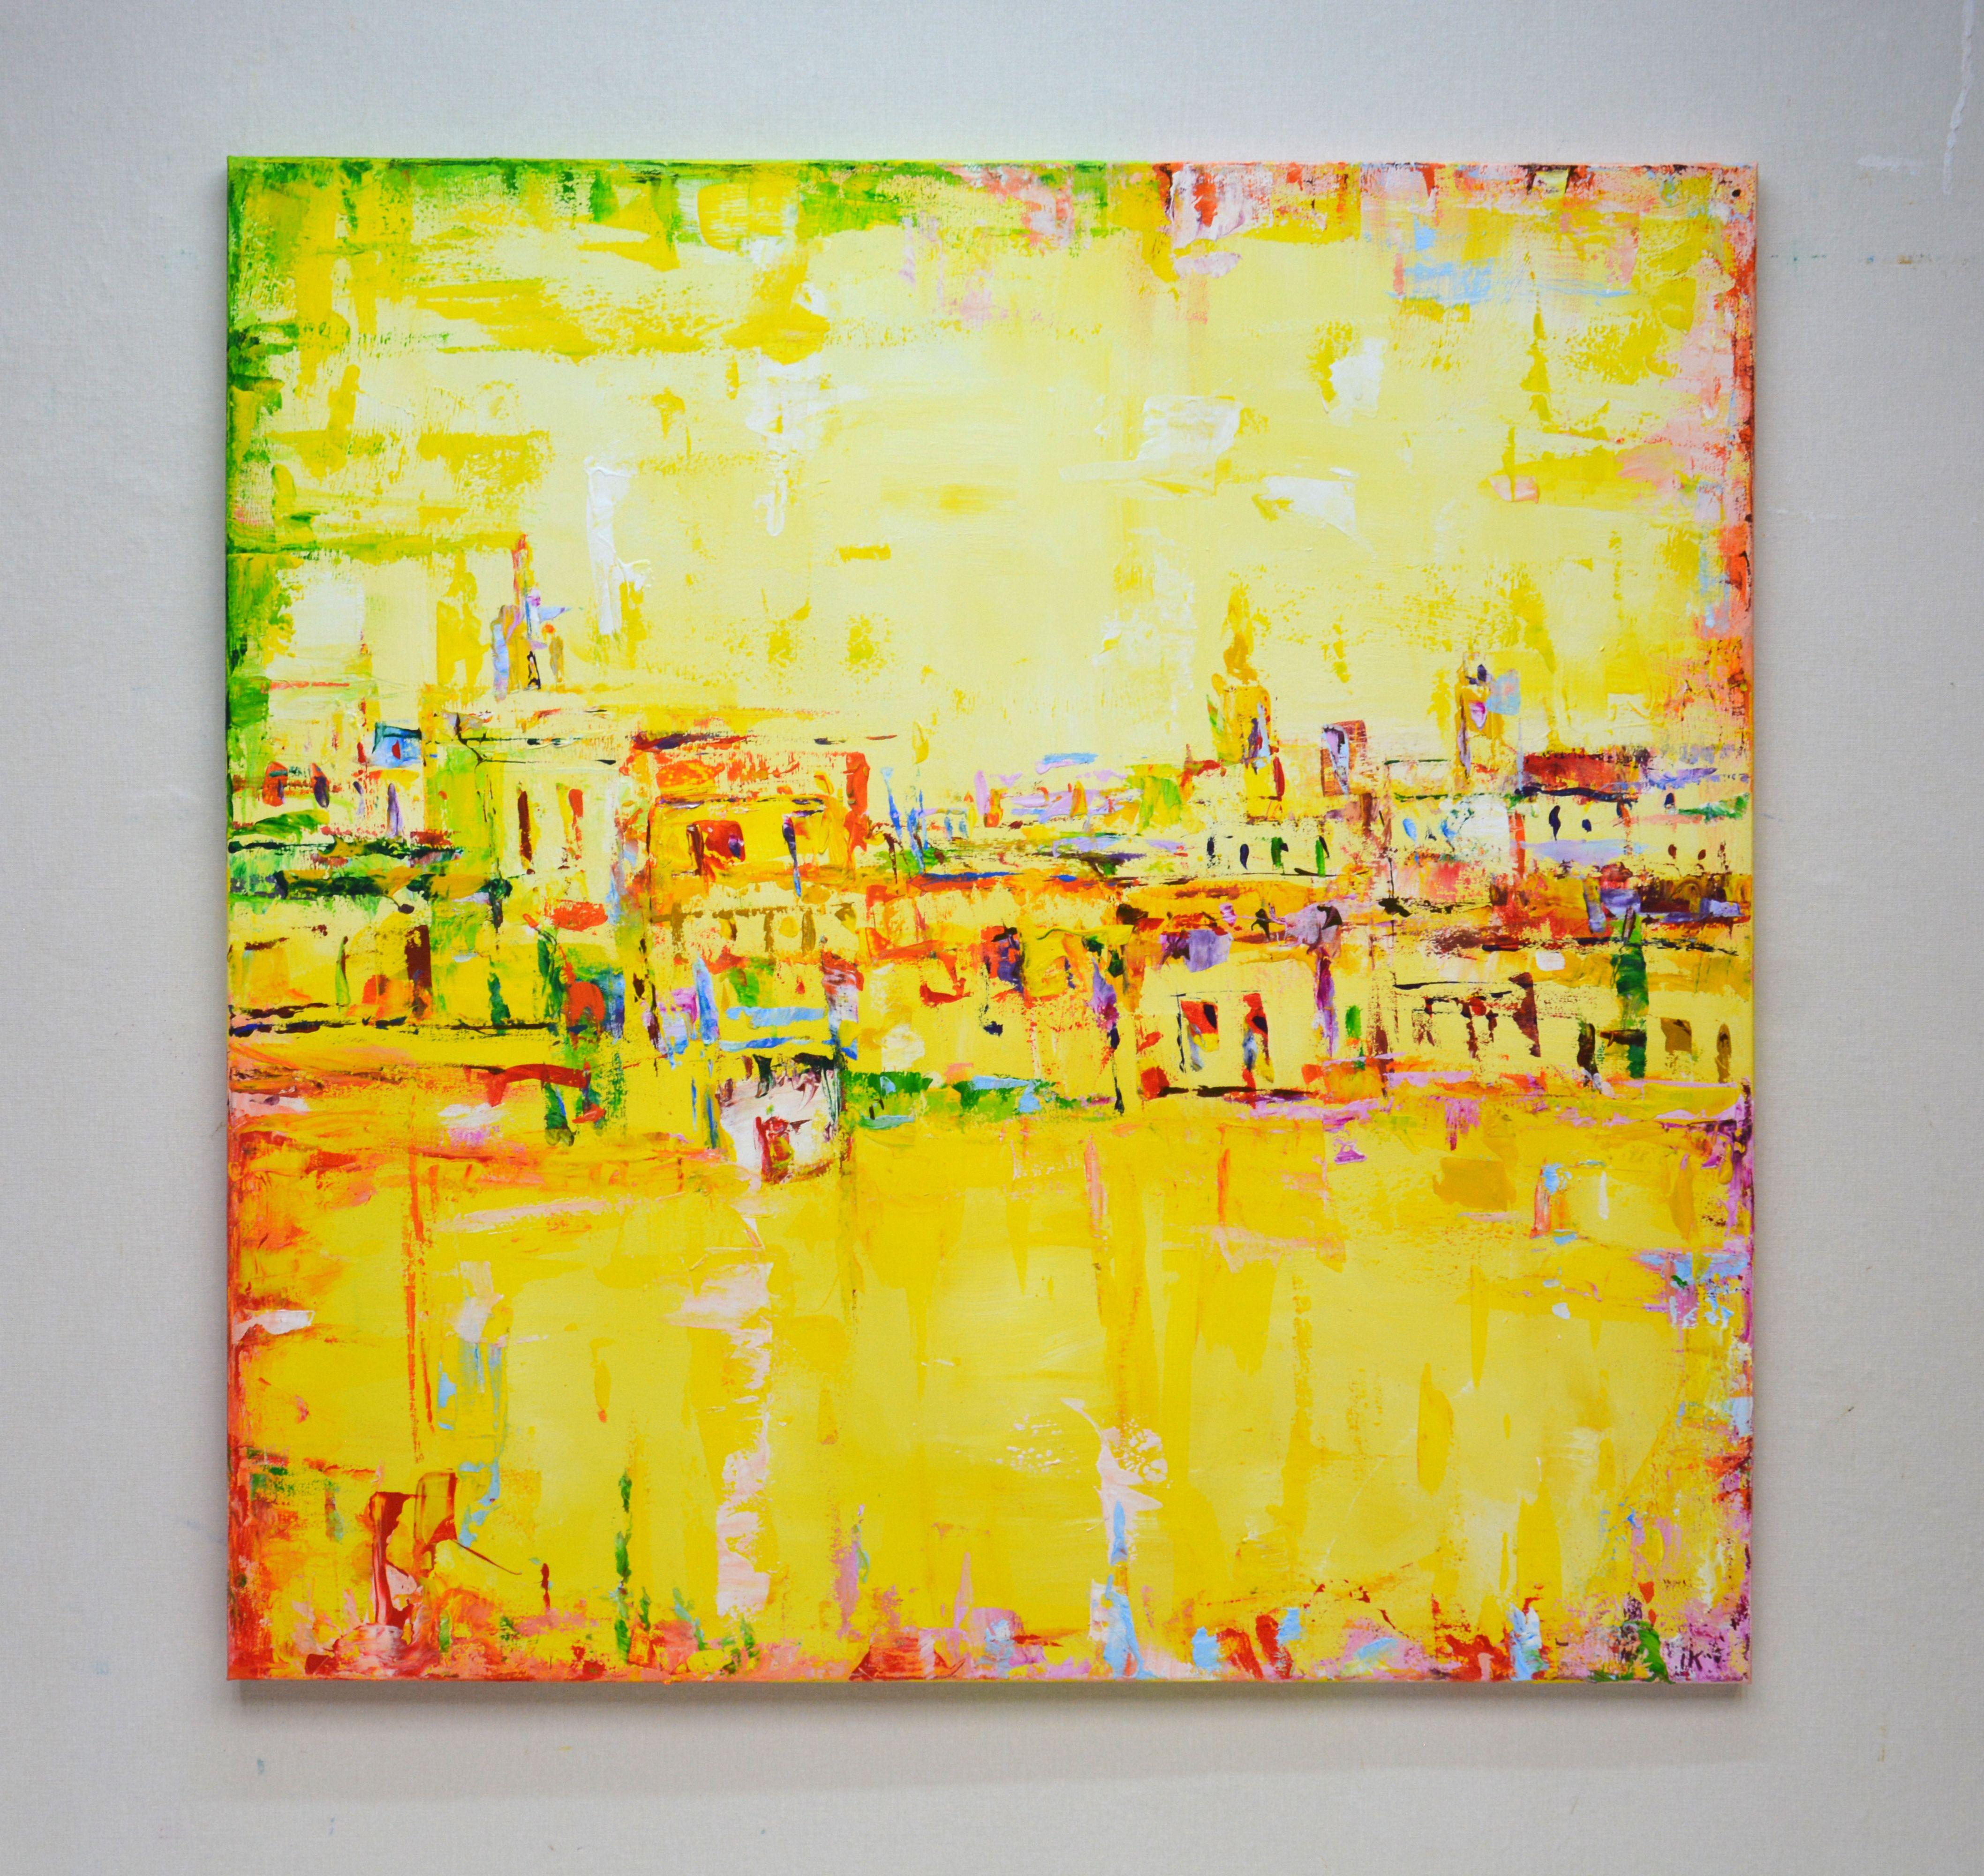 Sun in the city. This unique abstract acrylic painting will highlight your interior. The product has a consistent modern aesthetic design and is filled with positive energy. Colors overlap and overlap each other, and also stand out with subtle and